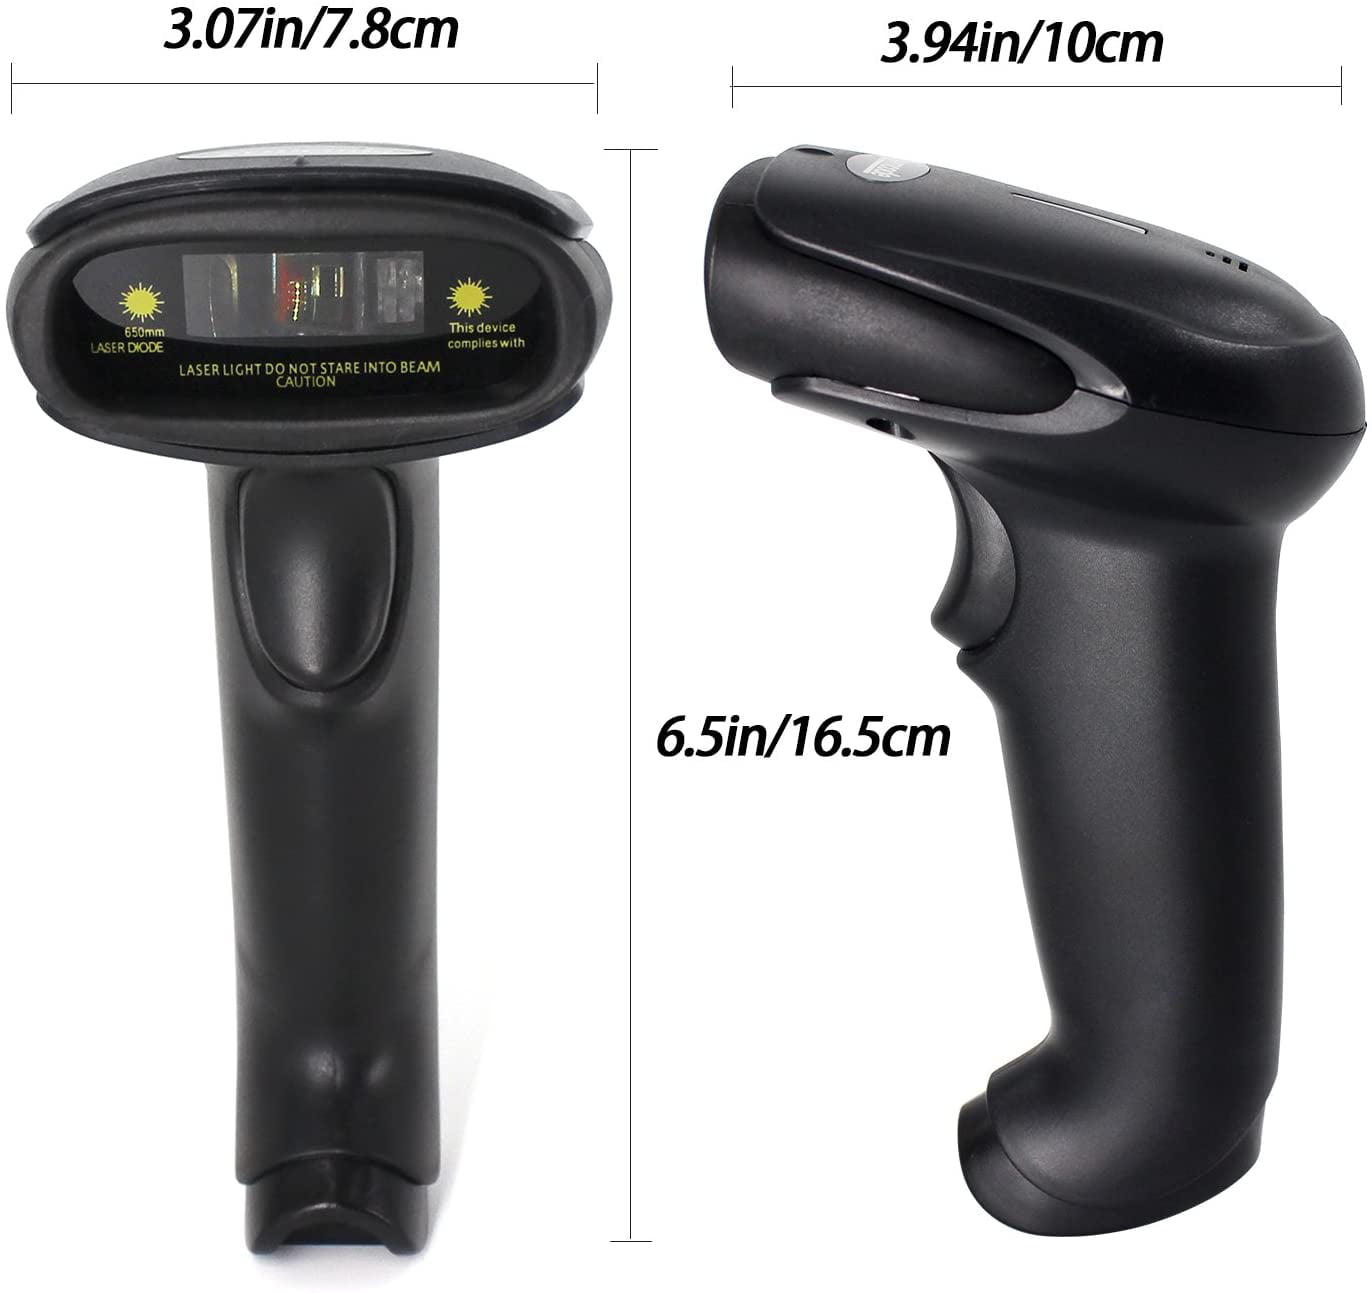 2.4GHz Wireless&USB2.0 Wired Rechargeable Automatic Barcode Scanner Laser Handhe 